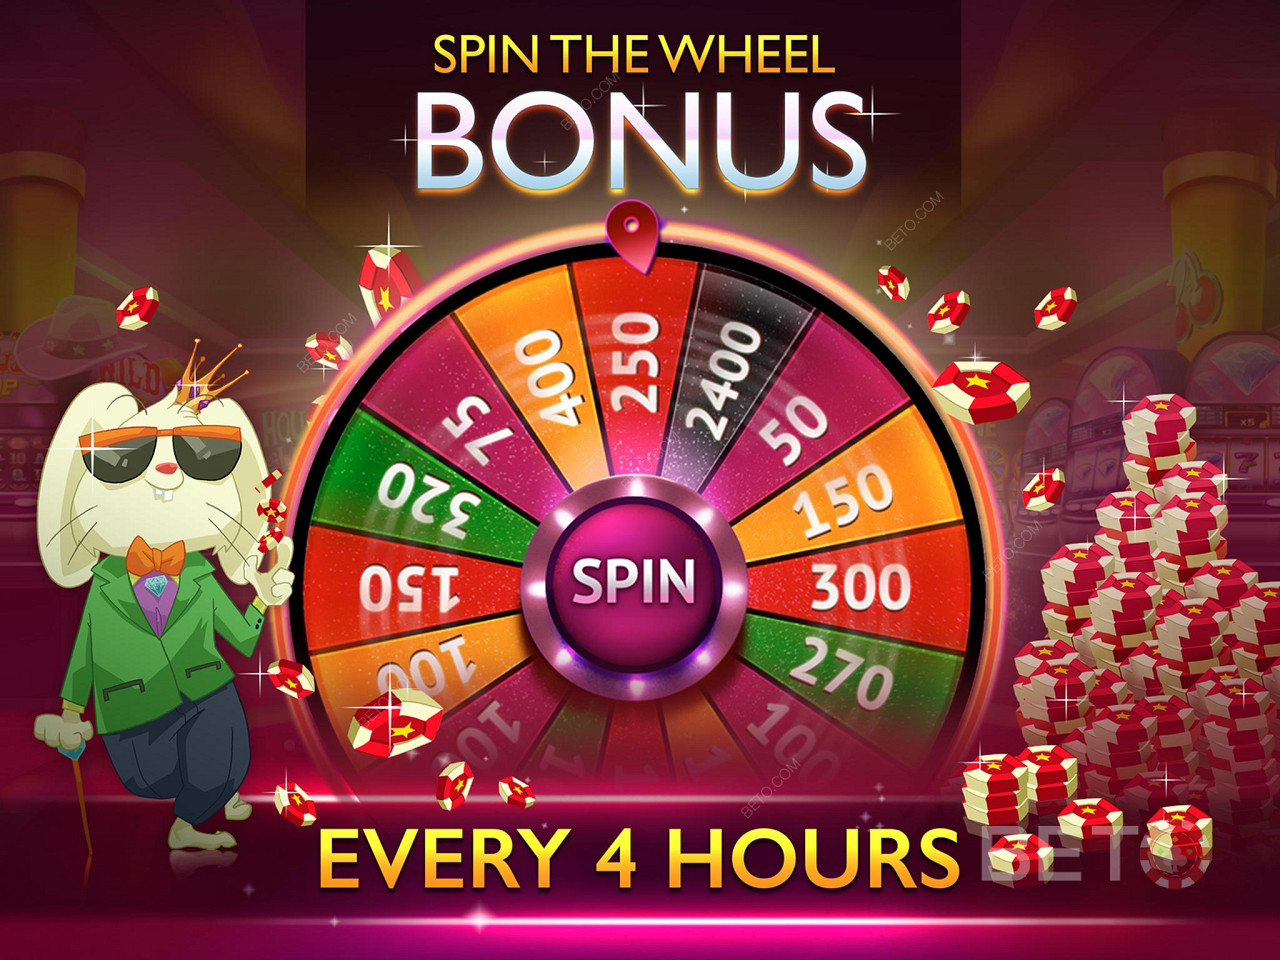 Free spins and live dealer games at MagicRed casino.